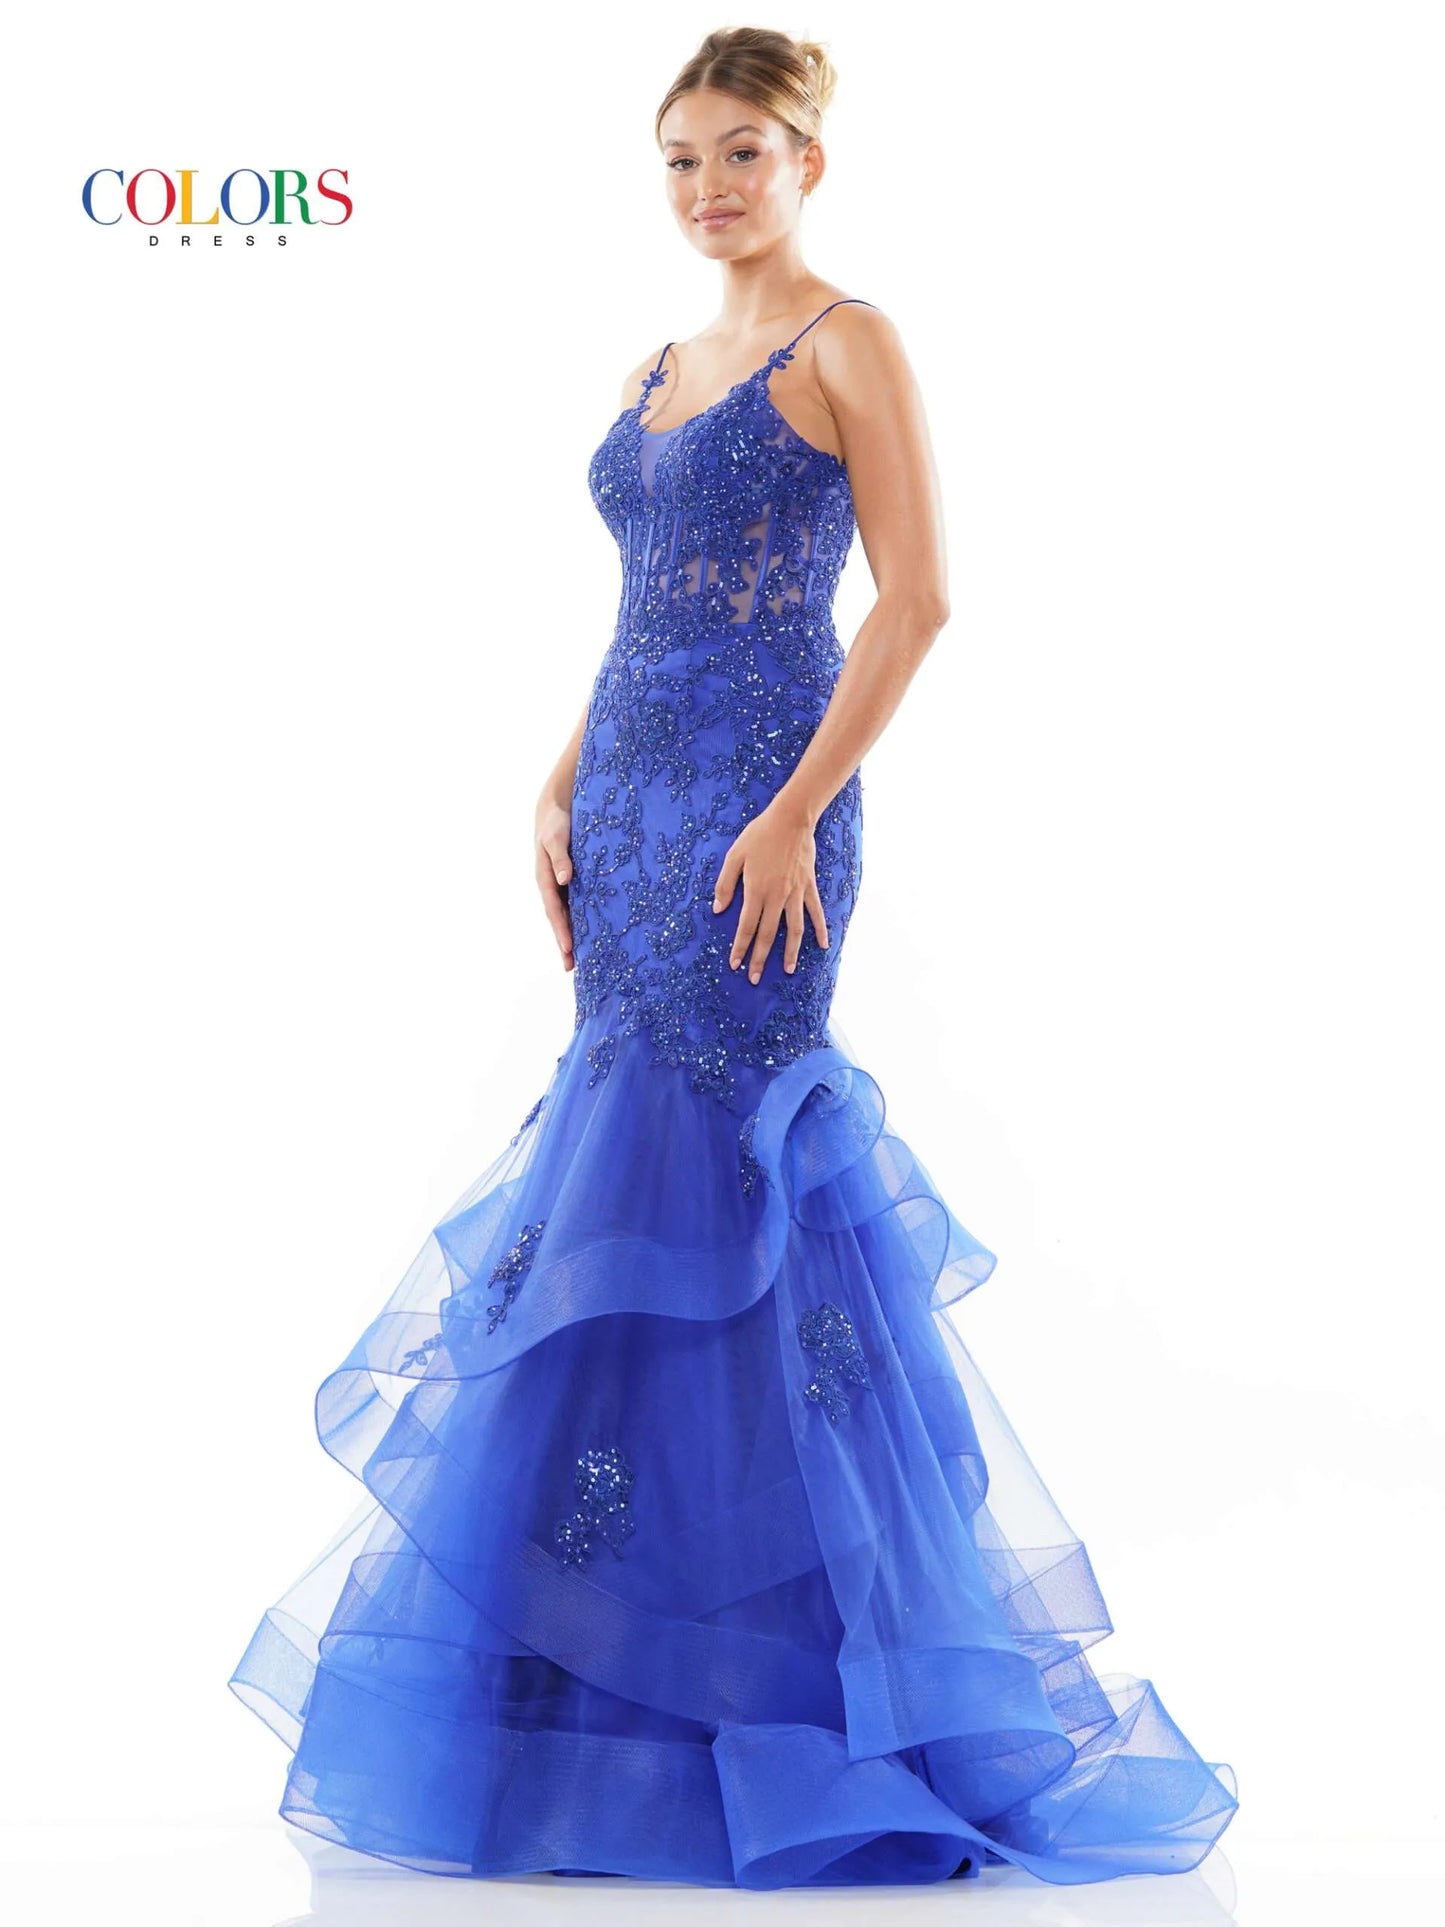 This Colors Dress 2899 Long Prom Dress is designed to flatter your figure with its fitted corset and lace applique details. The layered tulle adds a touch of elegance, perfect for formal events or pageants. Feel confident and beautiful in this stunning gown.